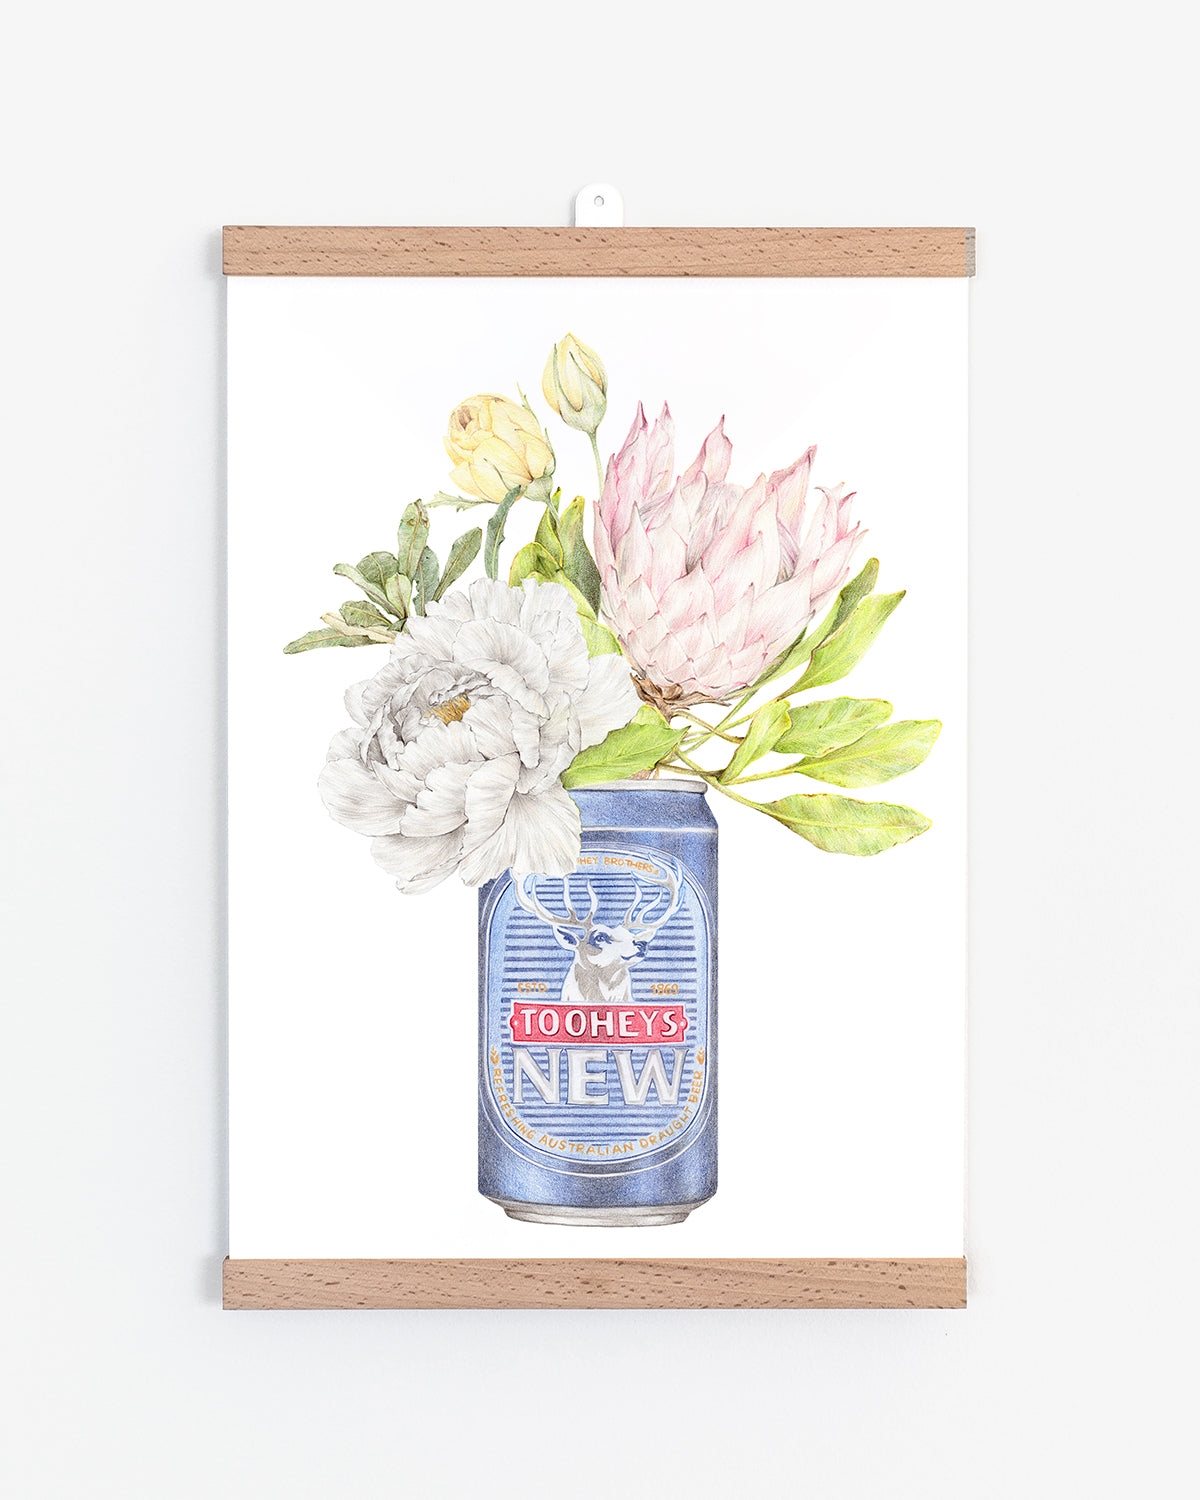 Australian art print with iconic Tooheys New beer with flowers